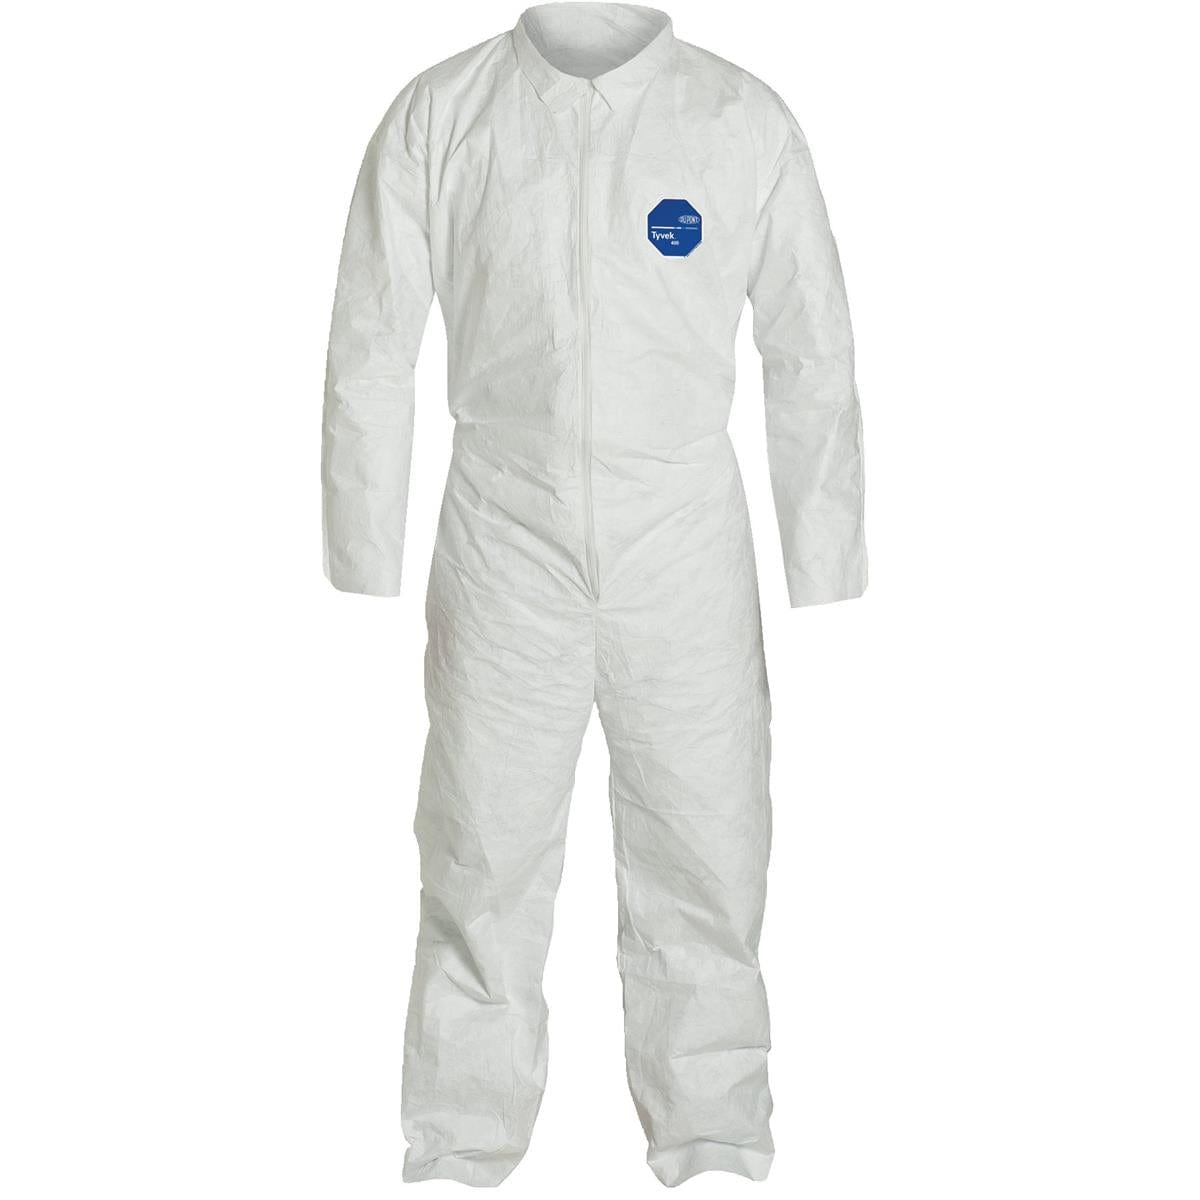 Image of DuPont Tyvek Coveralls